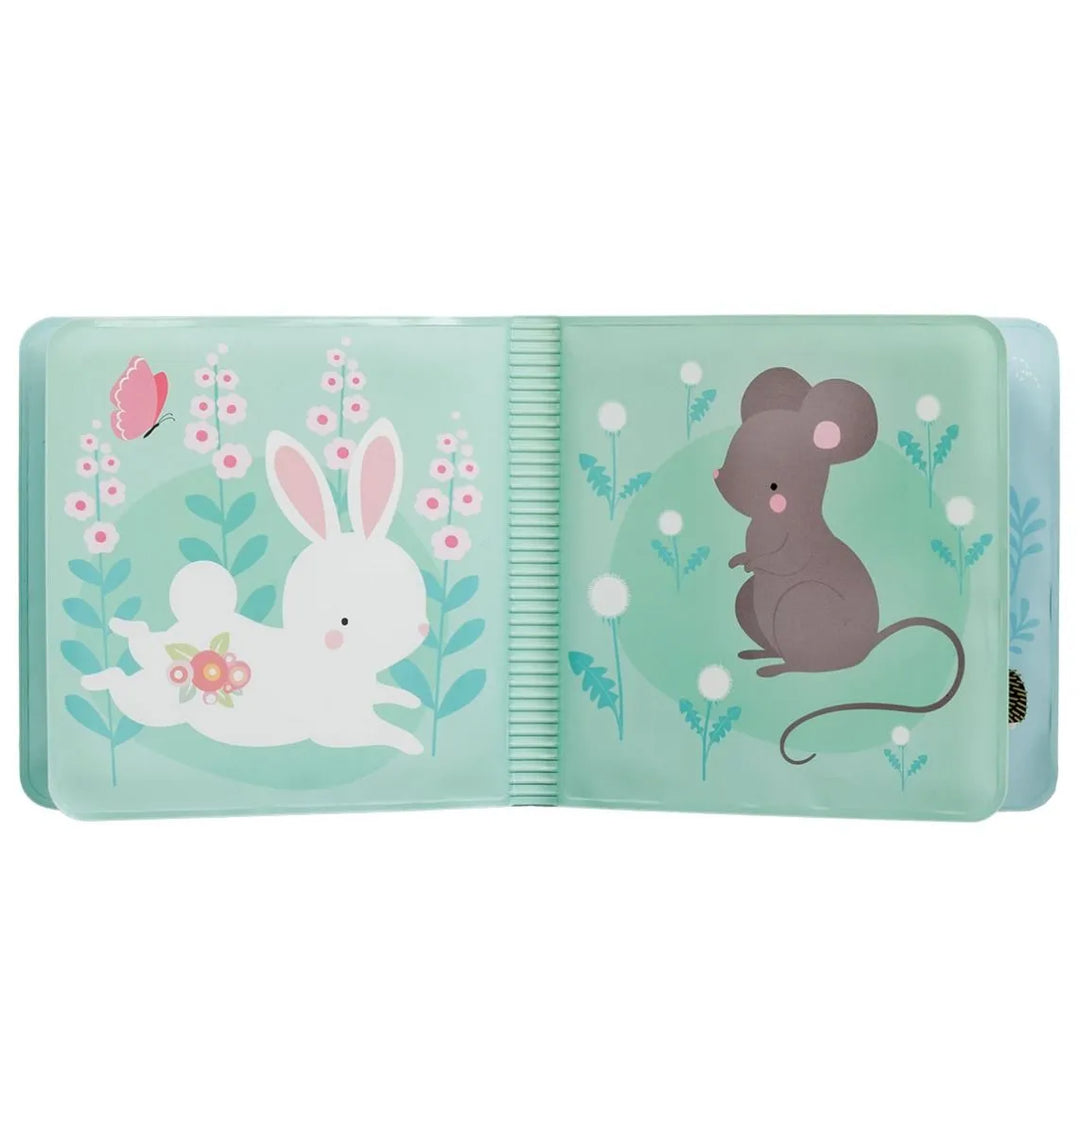 A Little Lovely Company - Bath Book - Forest Friends